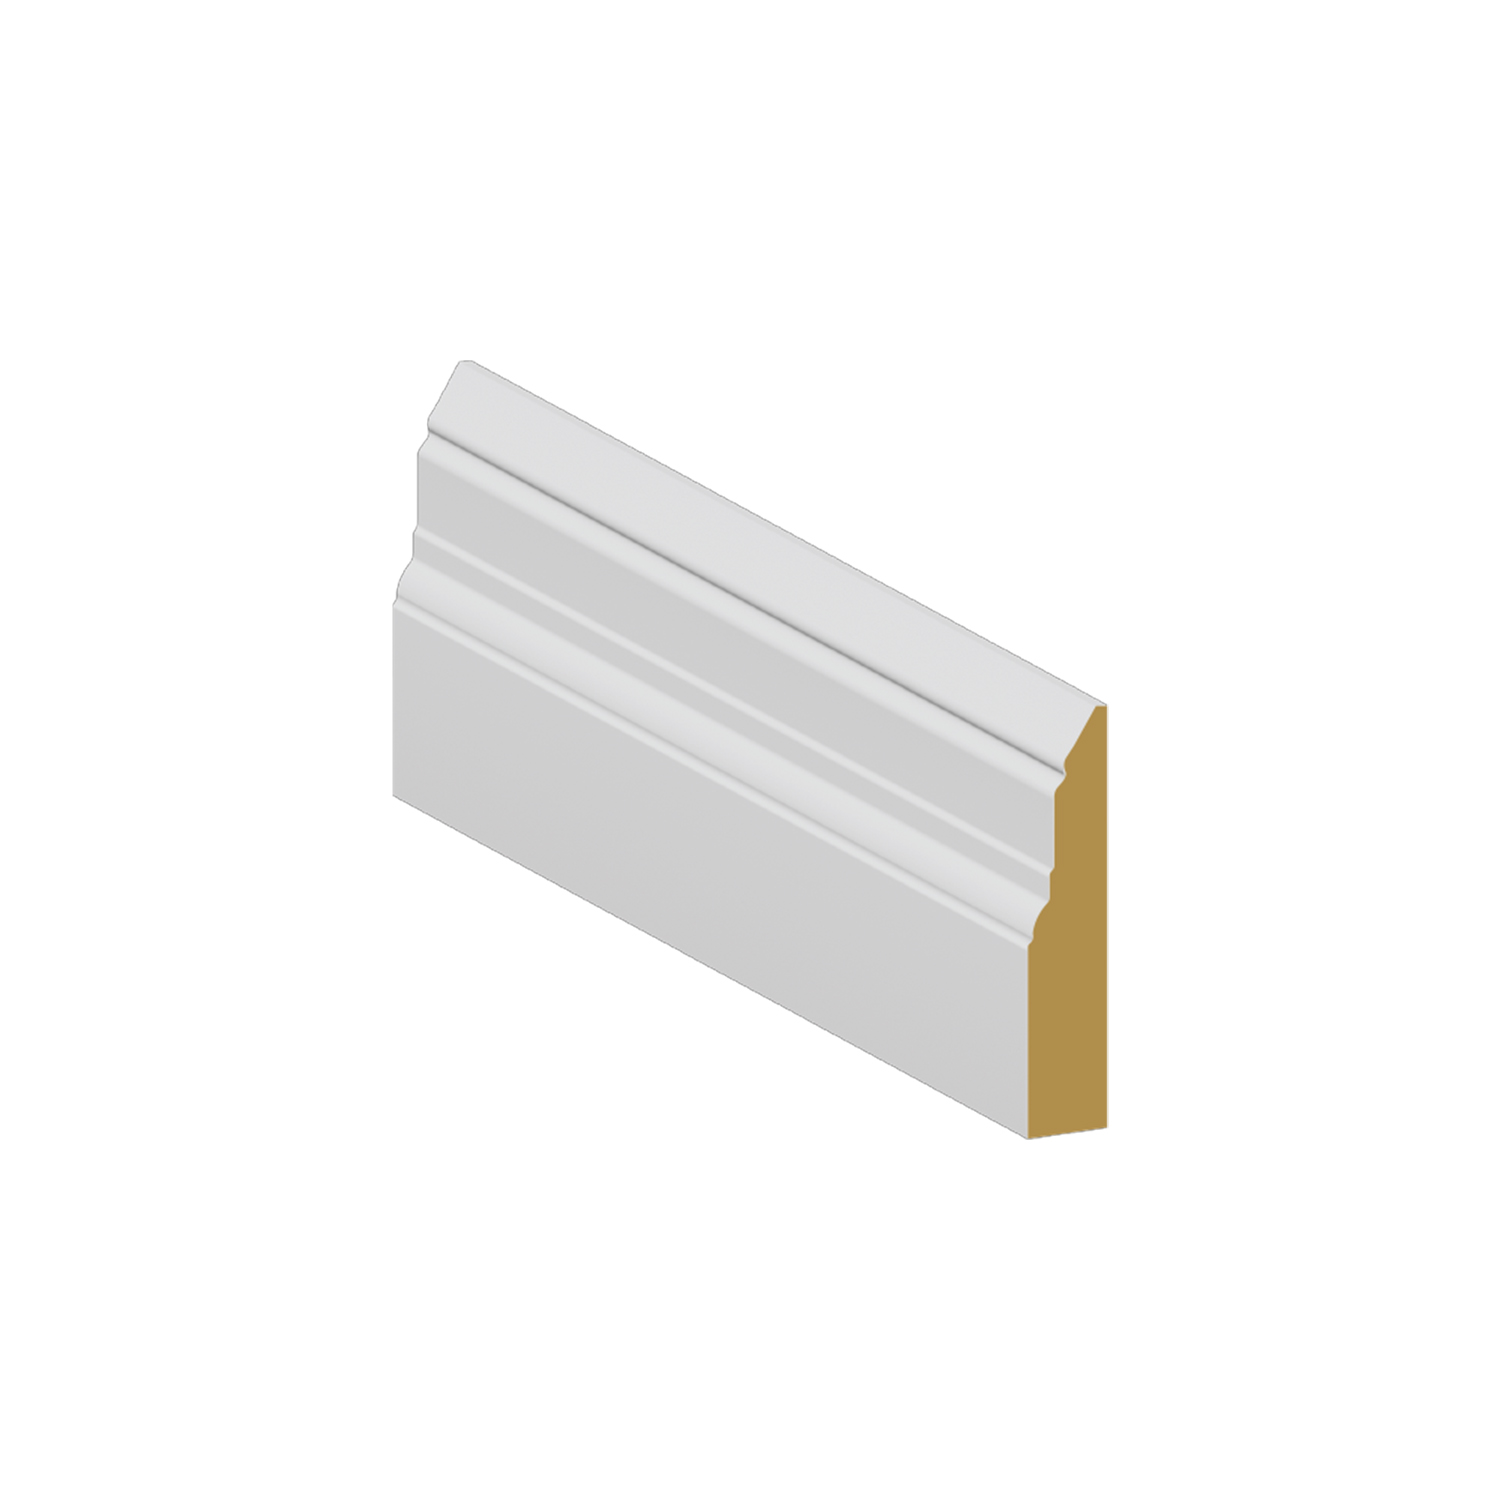 Casing MDF Contemporary Step 3 1/2 x 3/4 x 8' - $1.12/LF - SOLD PER PIECE - EACH PIECE IS 8' - $9 EACH